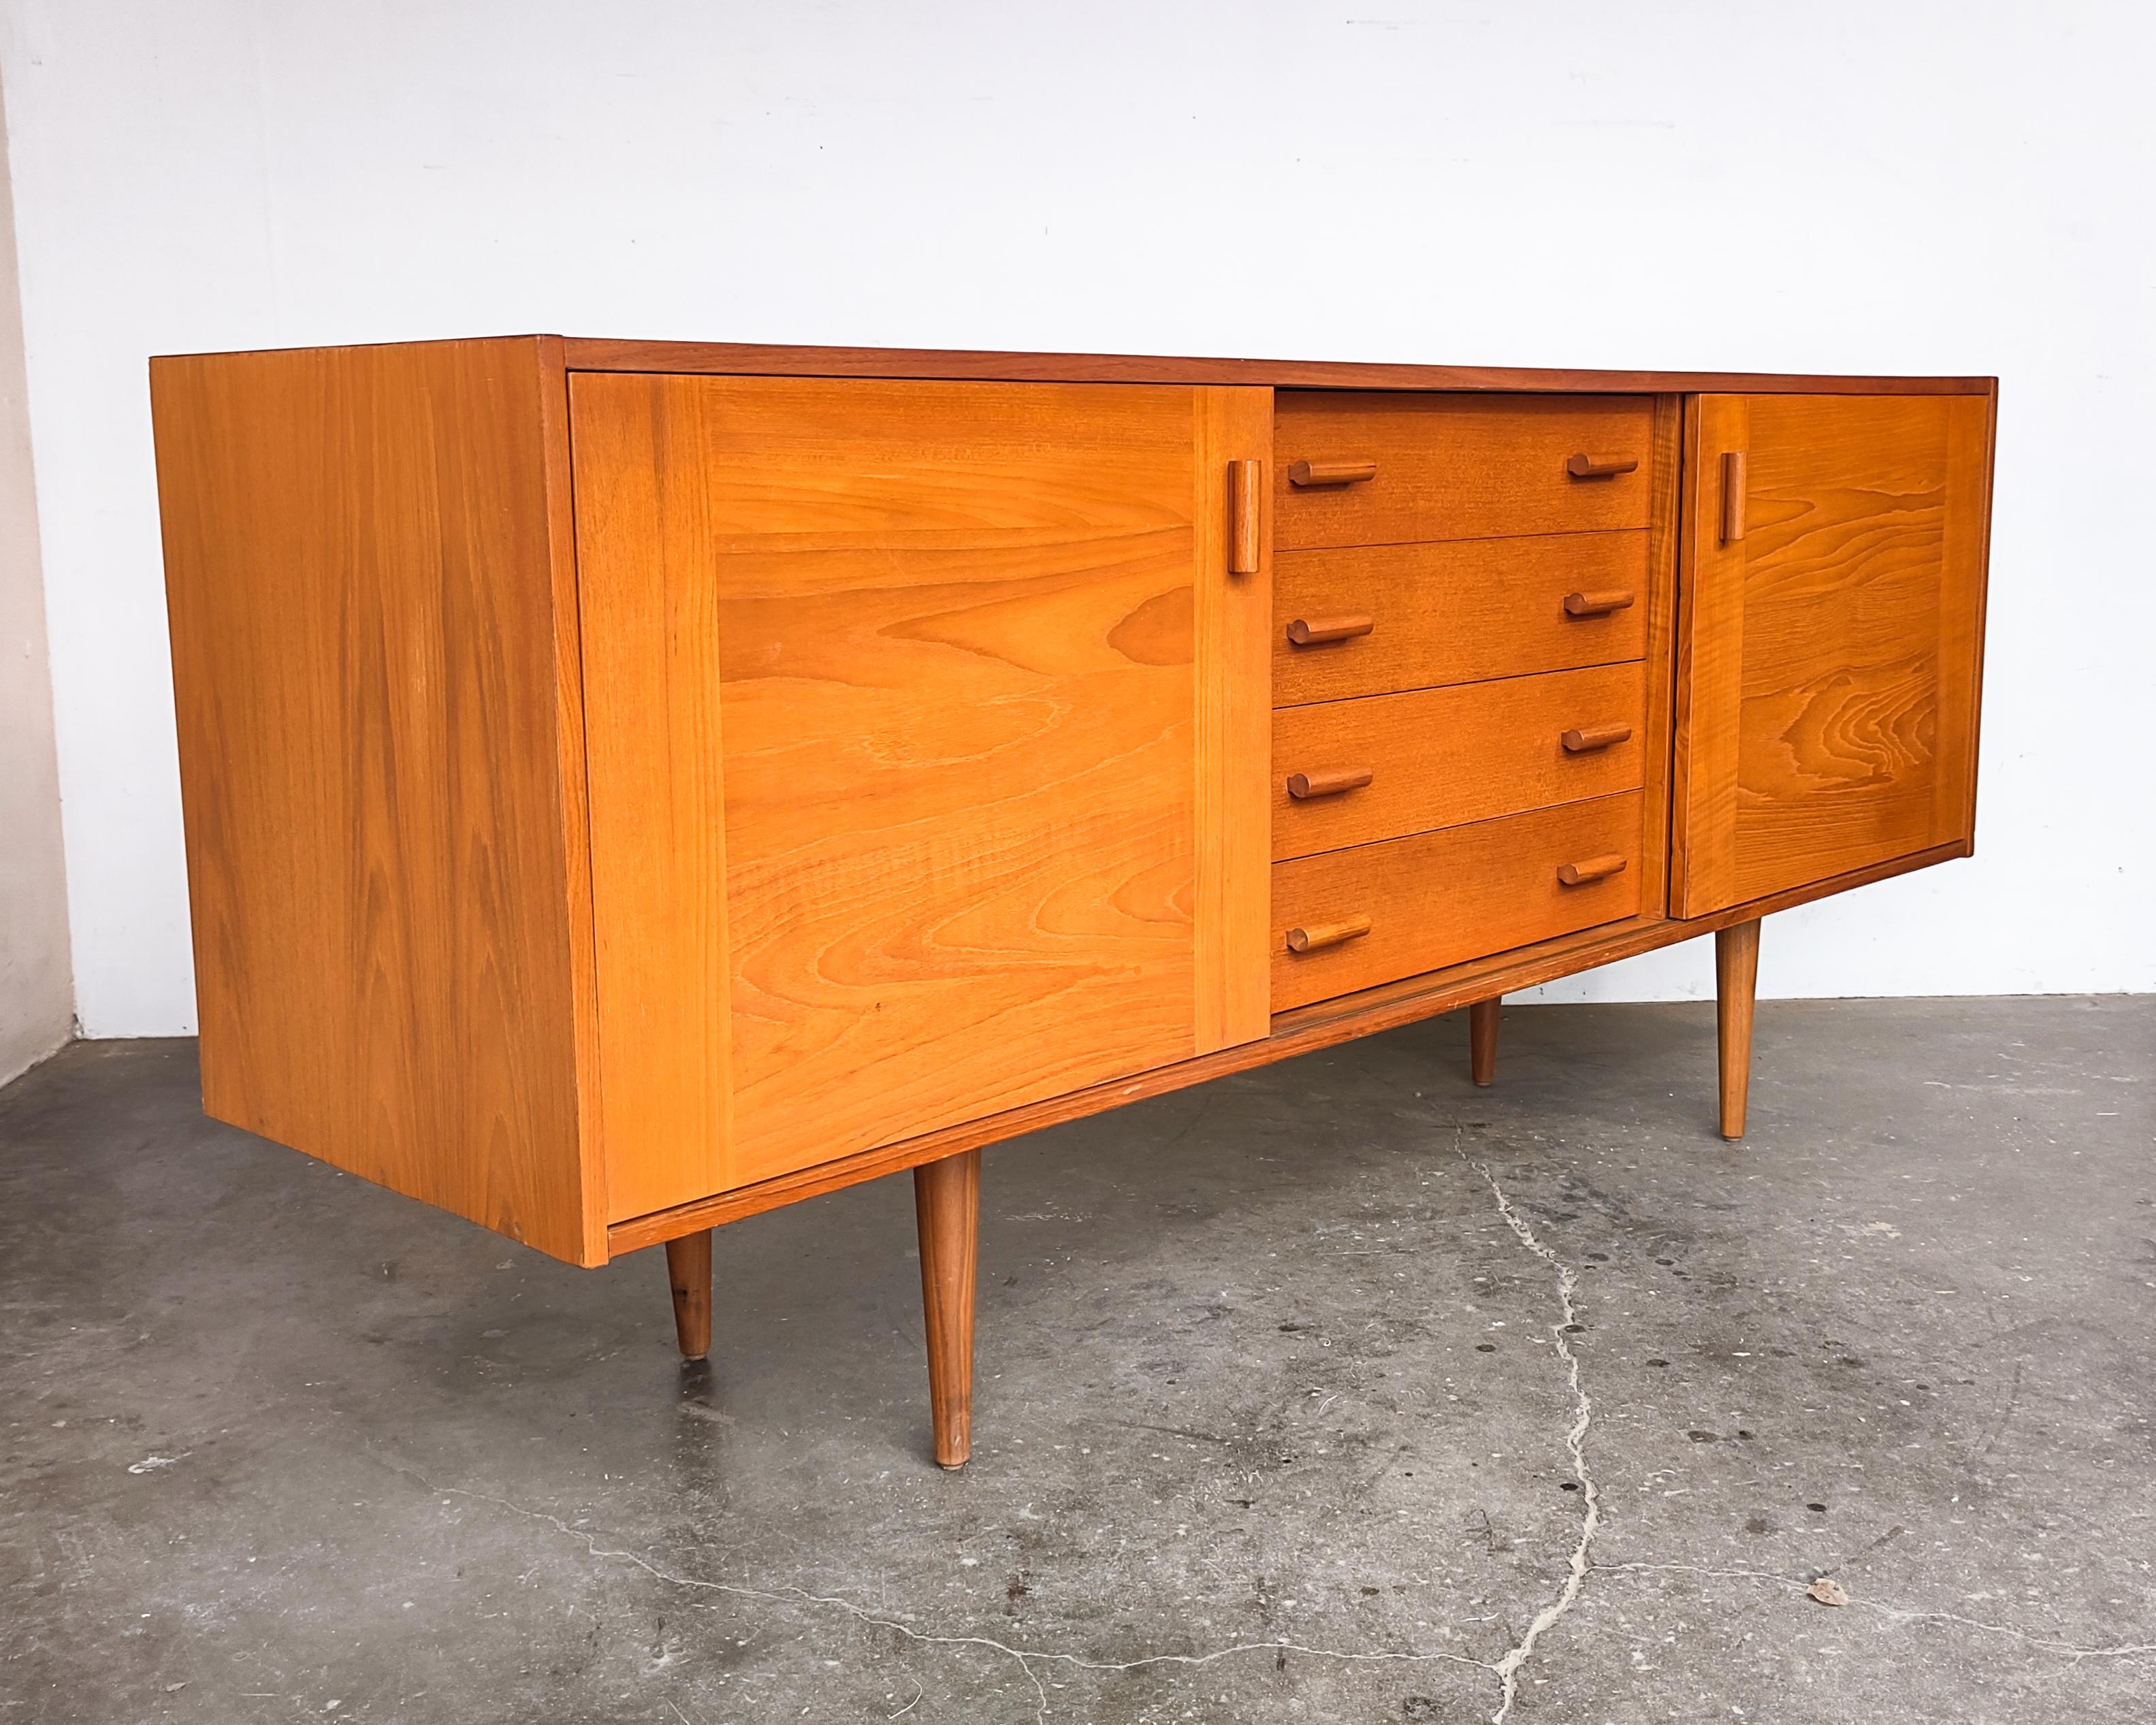 Danish teak credenza by Domino Mobler with four drawers down the middle and sliding doors covering cabinets on either side. Each cabinet has an adjustable shelf and there is a hole for cables in the right-side cabinet. Teak dowel handles and drawer